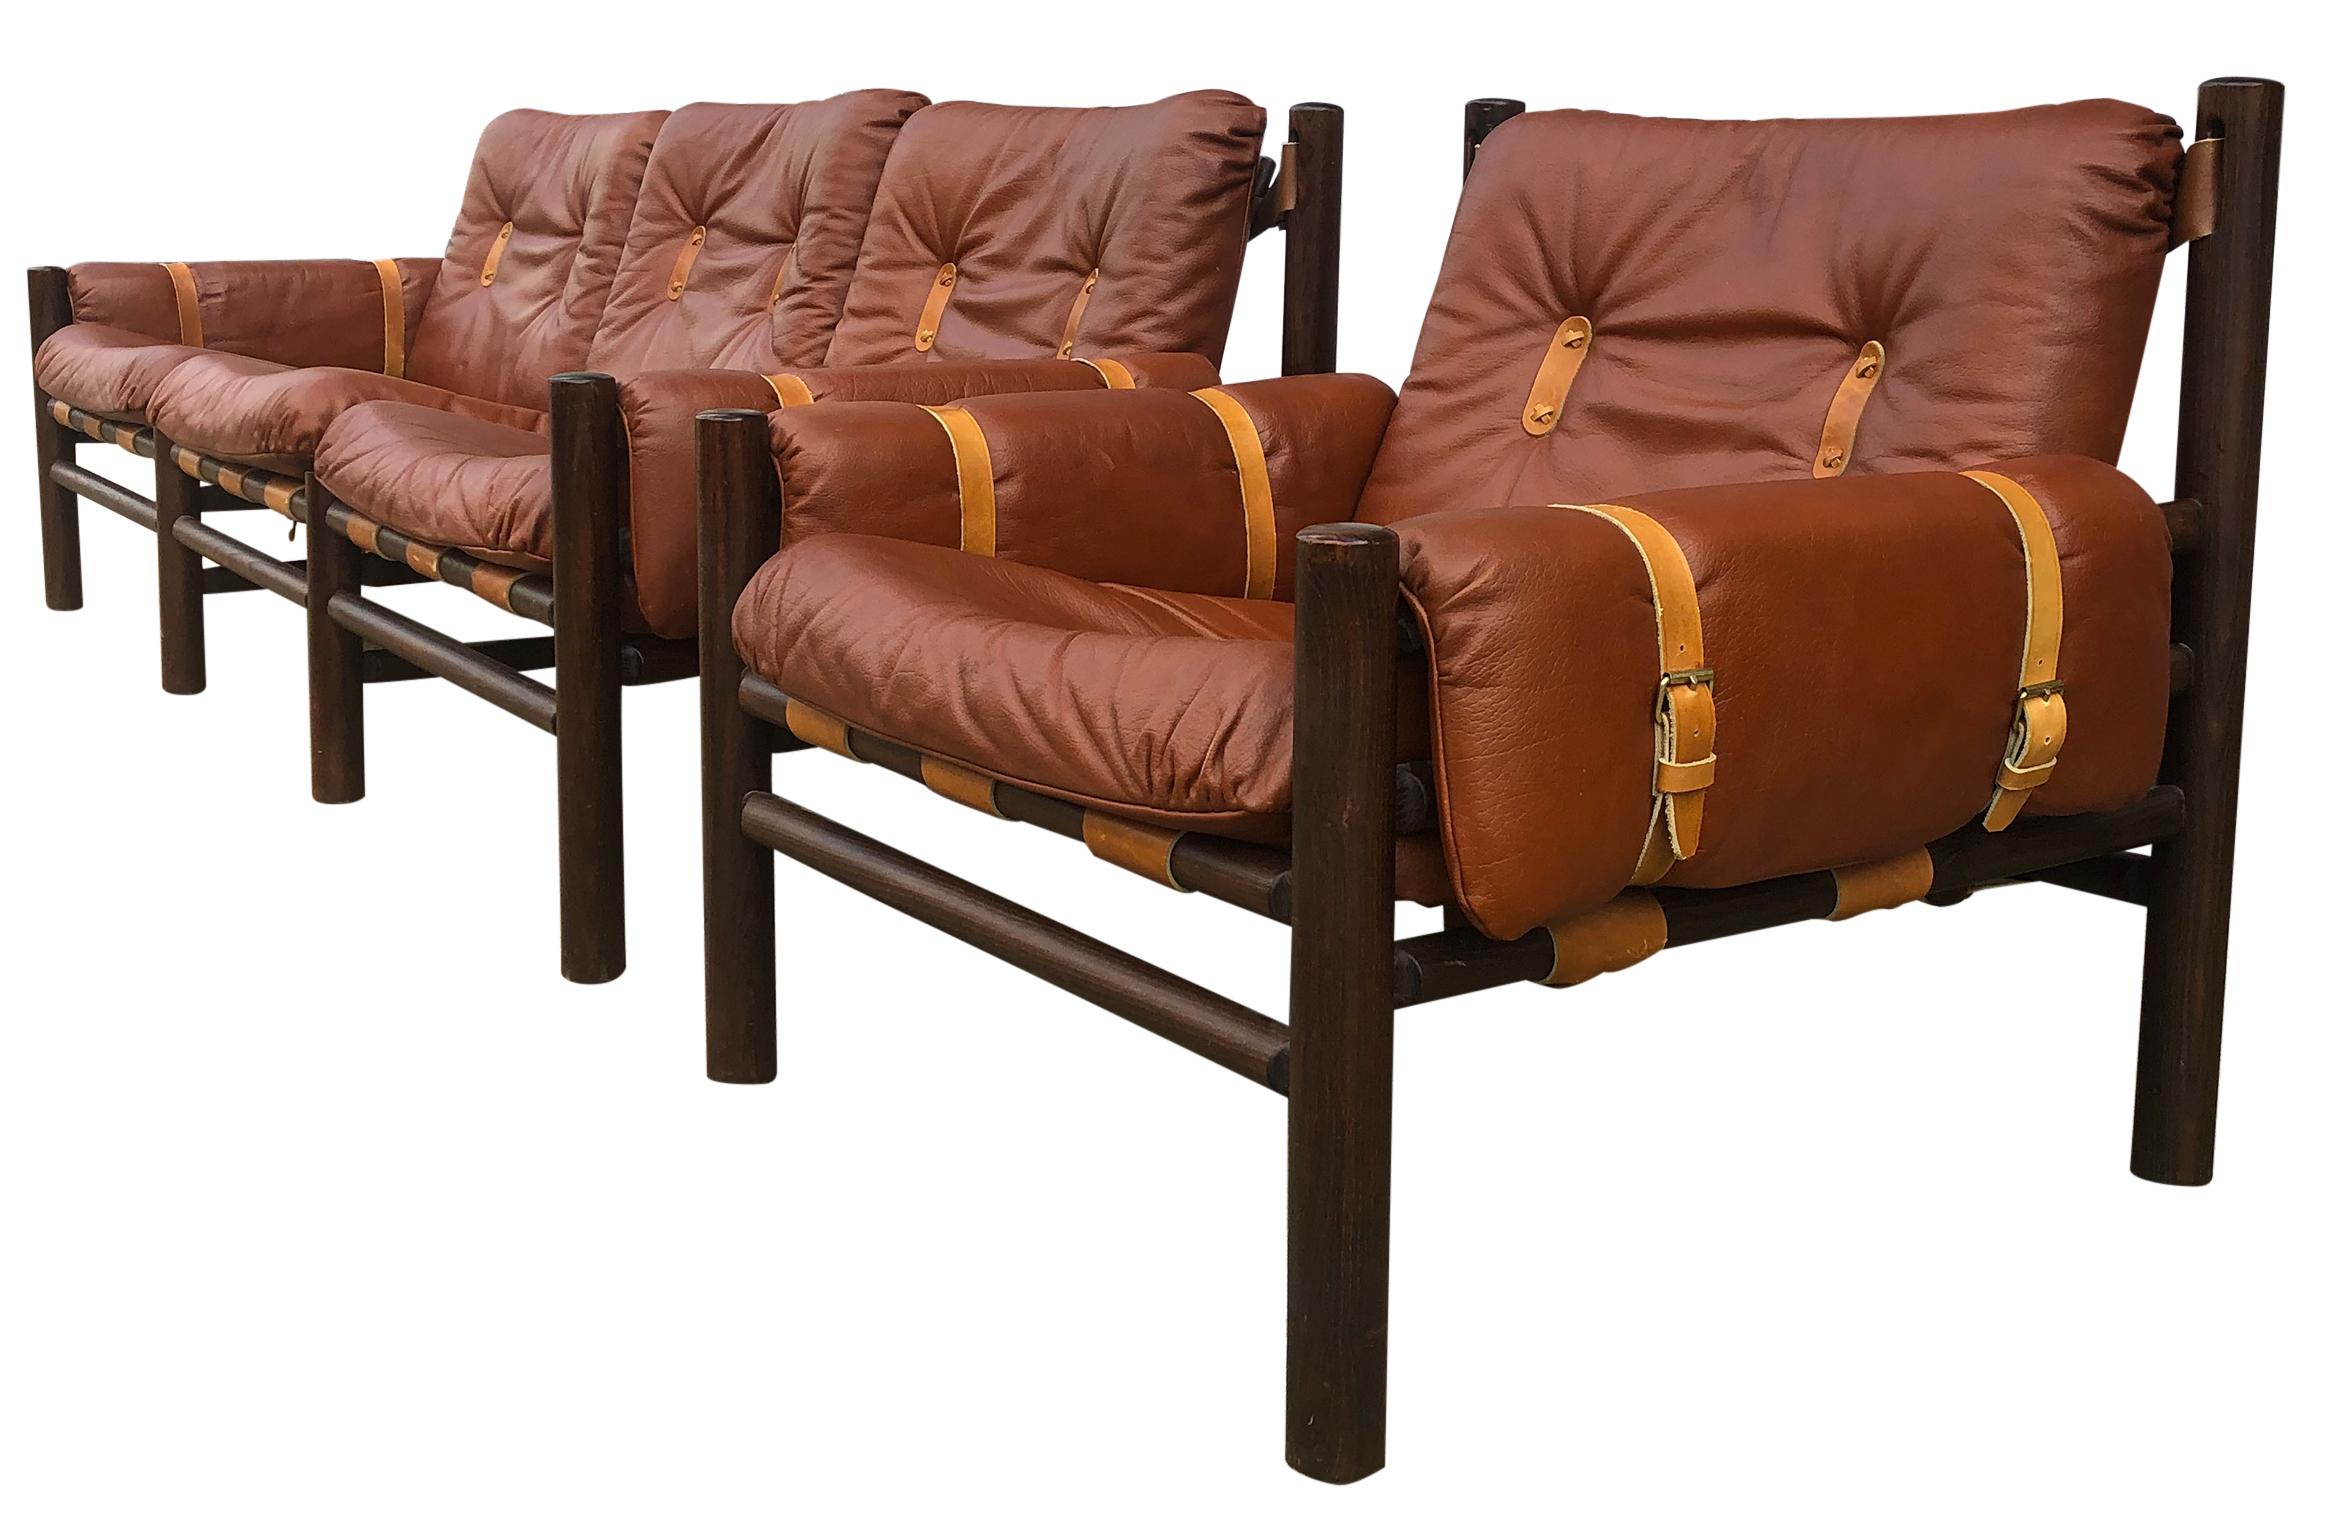 Beautiful Unique Midcentury low sling leather safari 3-seat sofa lounge chair set by Bruksbo - Norwegian Designer. The founder of Lom Møbler later Lom Møbelfabrikk, Ivar Opsvik, designed this beautiful safari-inspired chair in the 1970s. Very soft